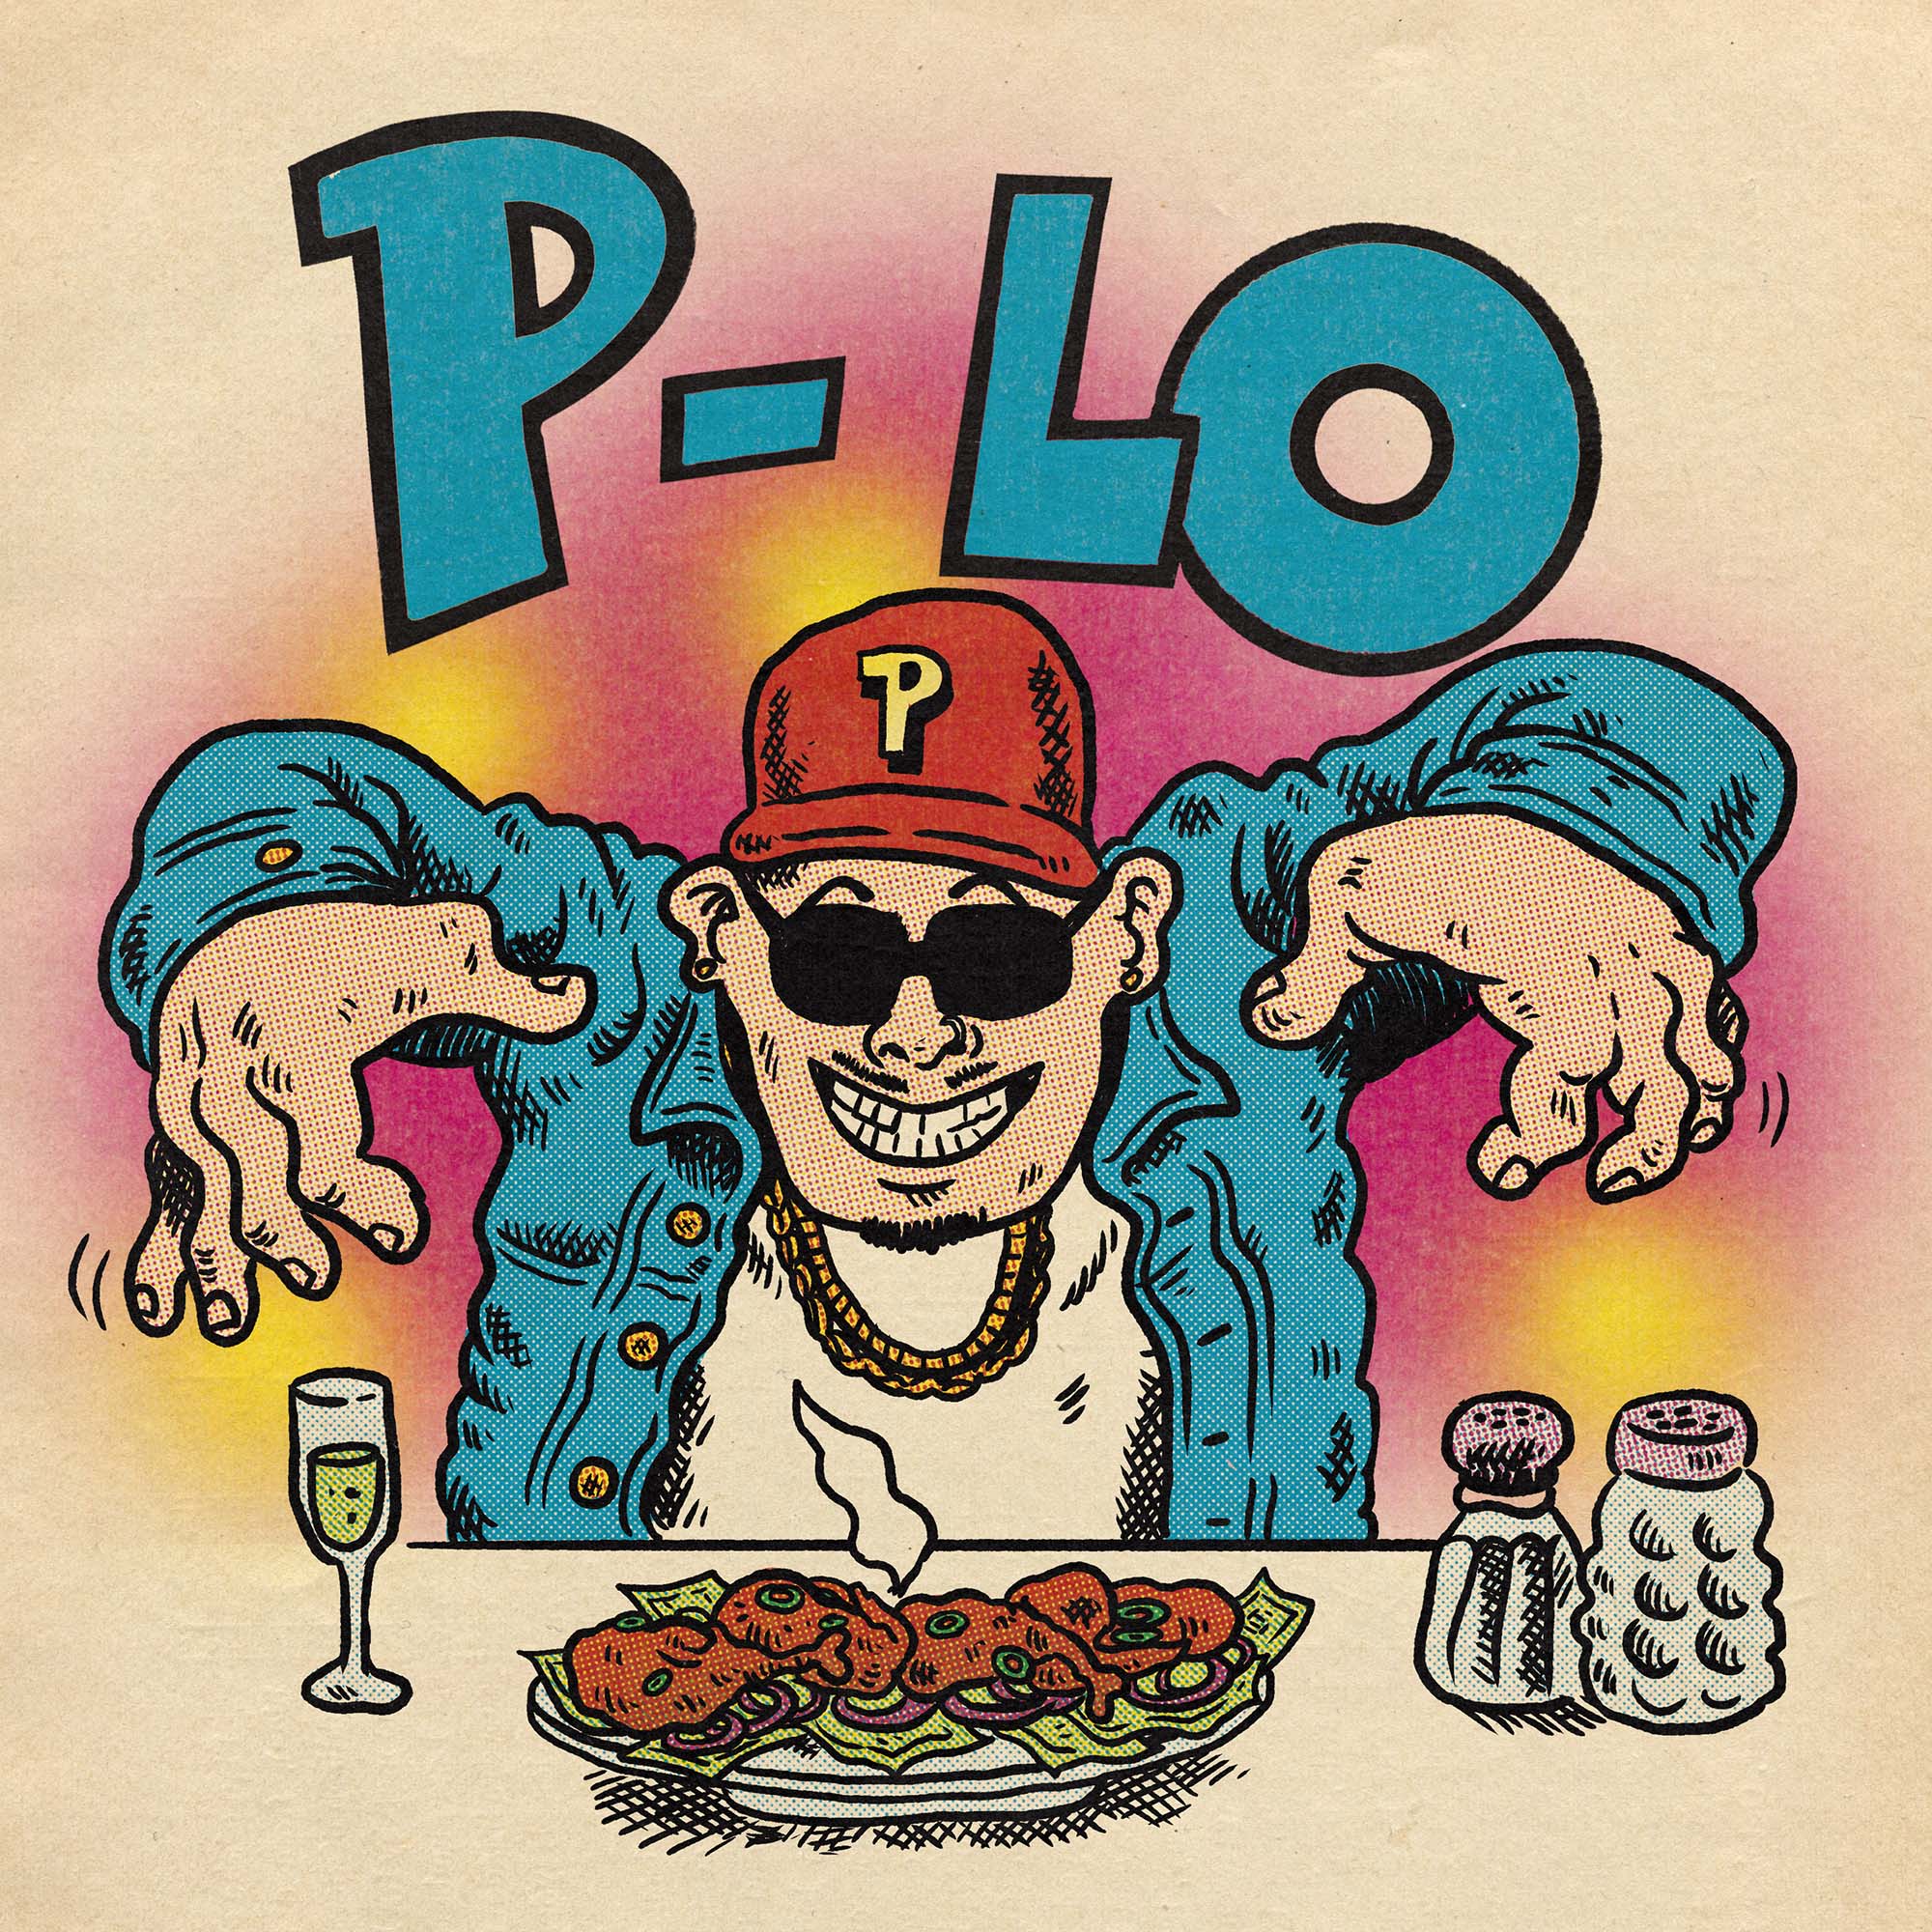 The rapper P-Lo wiggles his fingers in delight over a plate of chicken wings sitting on a bed of dollar bills.